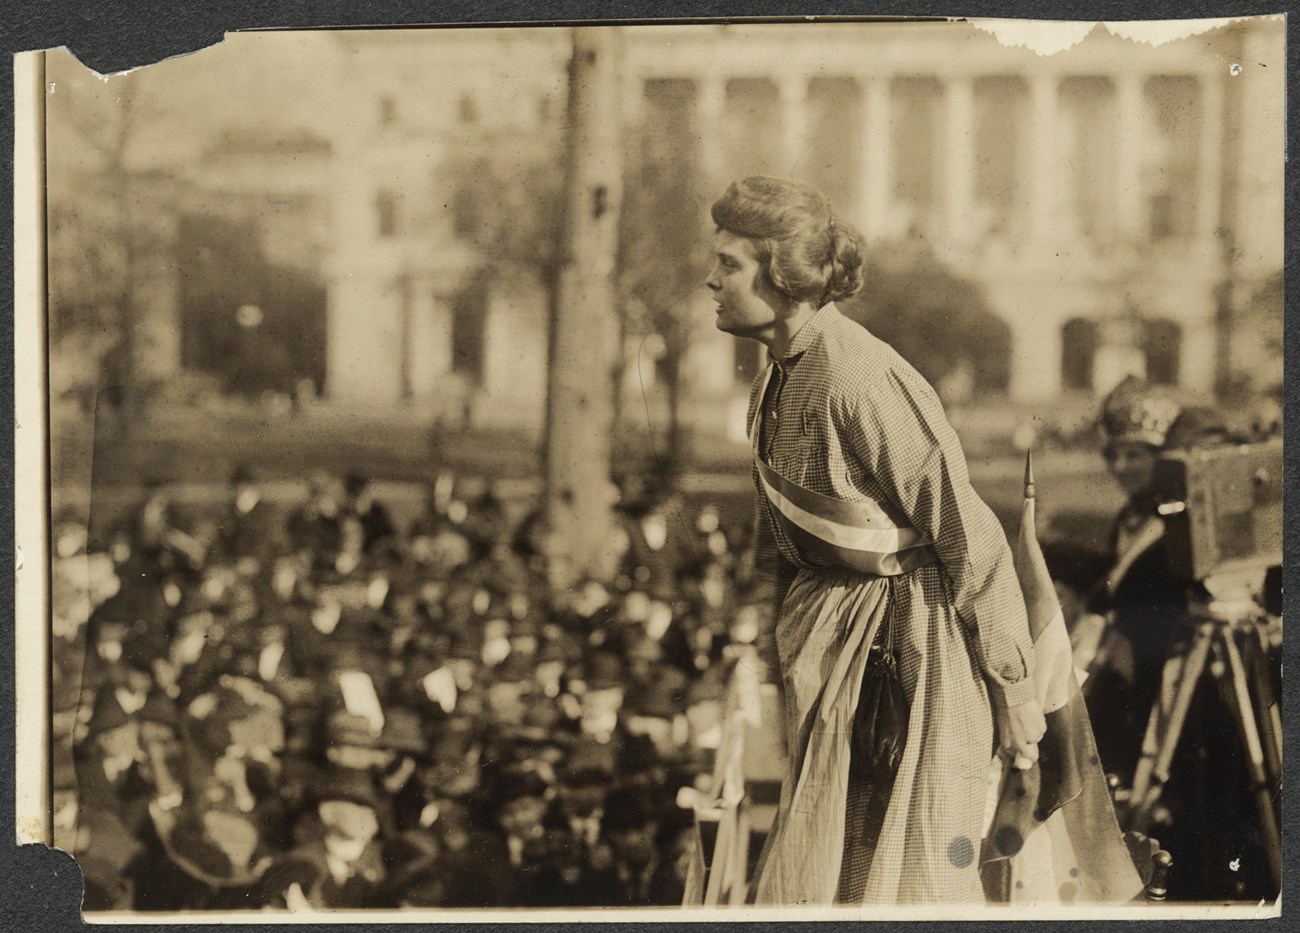 Photograph of Lucy Branham speaking at outdoor meeting during the NWP "Prison Special" tour. Branham is above a large crowd, wearing prison dress and suffrage sash, with suffrage flag and camera on tripod behind her (right).